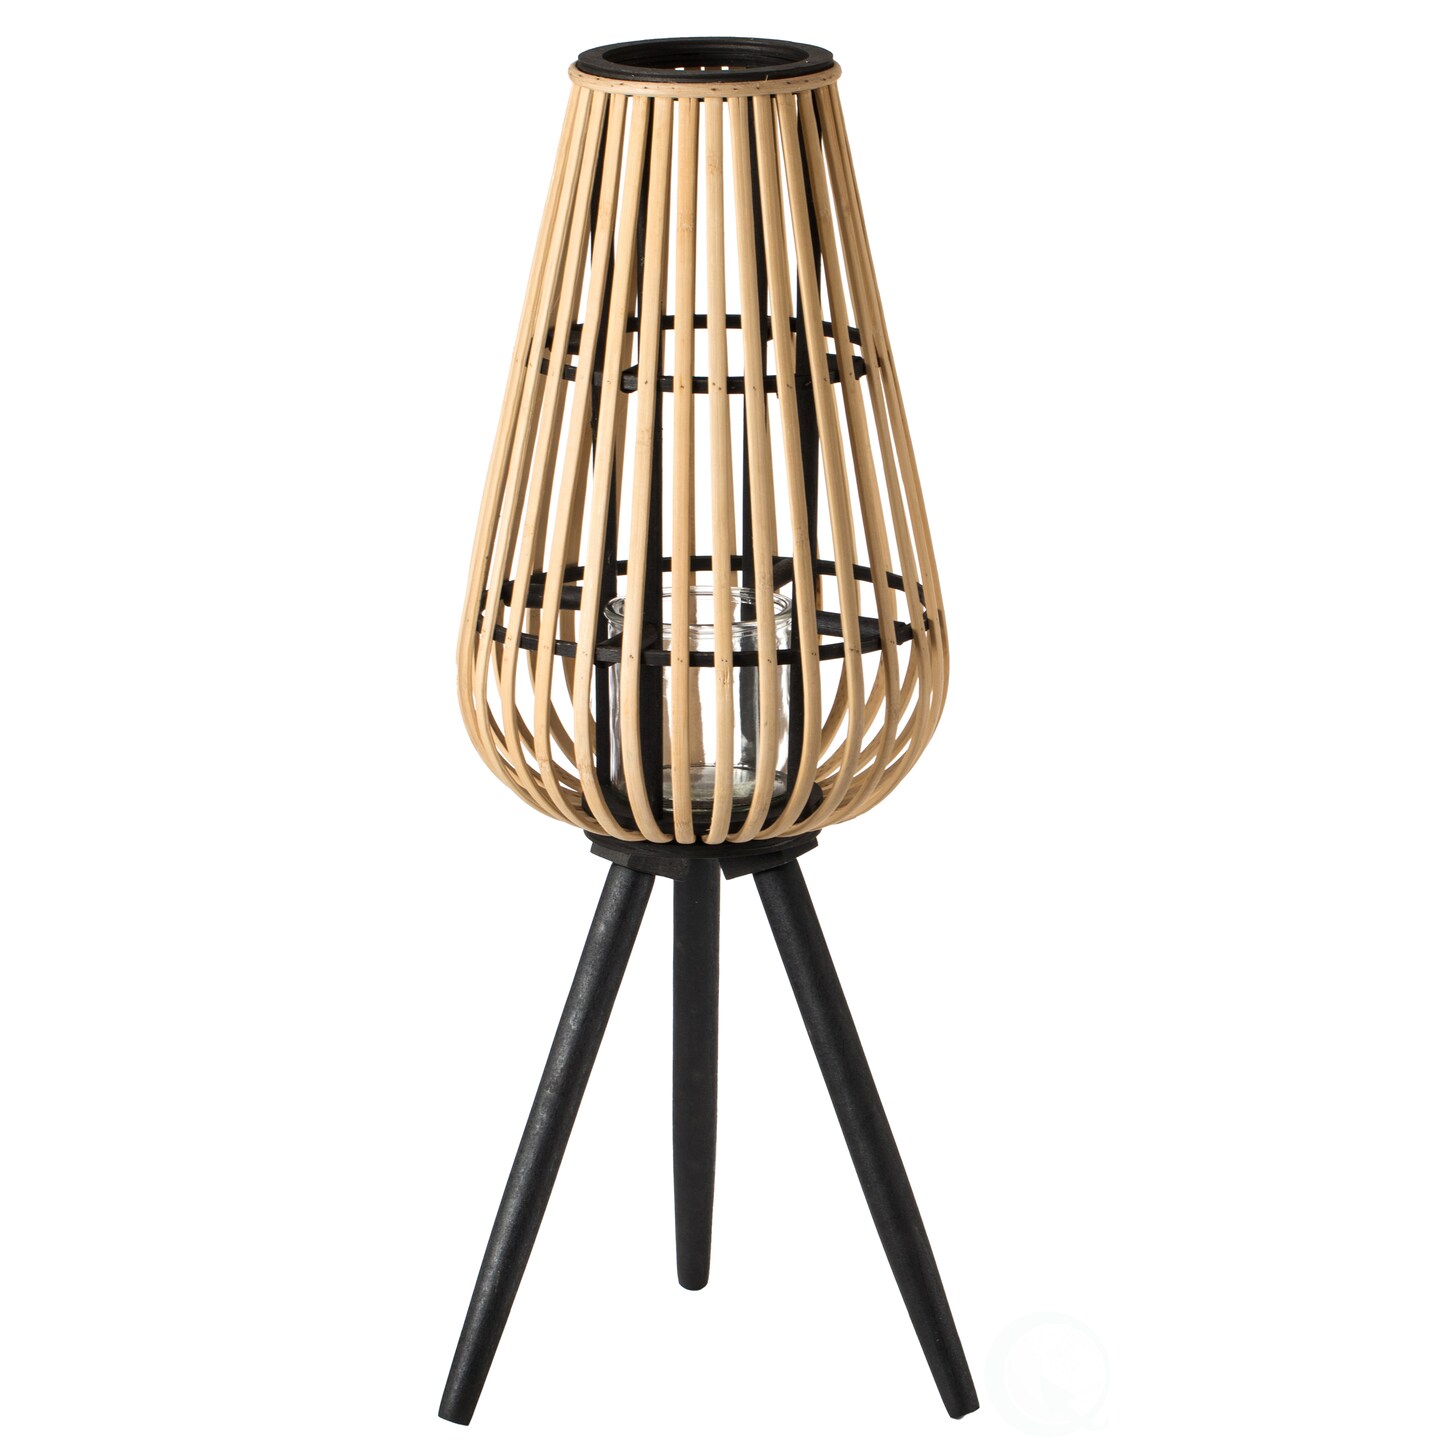 Indoor and Outdoor Modern Natural Bamboo Decorative Lantern with Black Stand and Glass Candle Holder